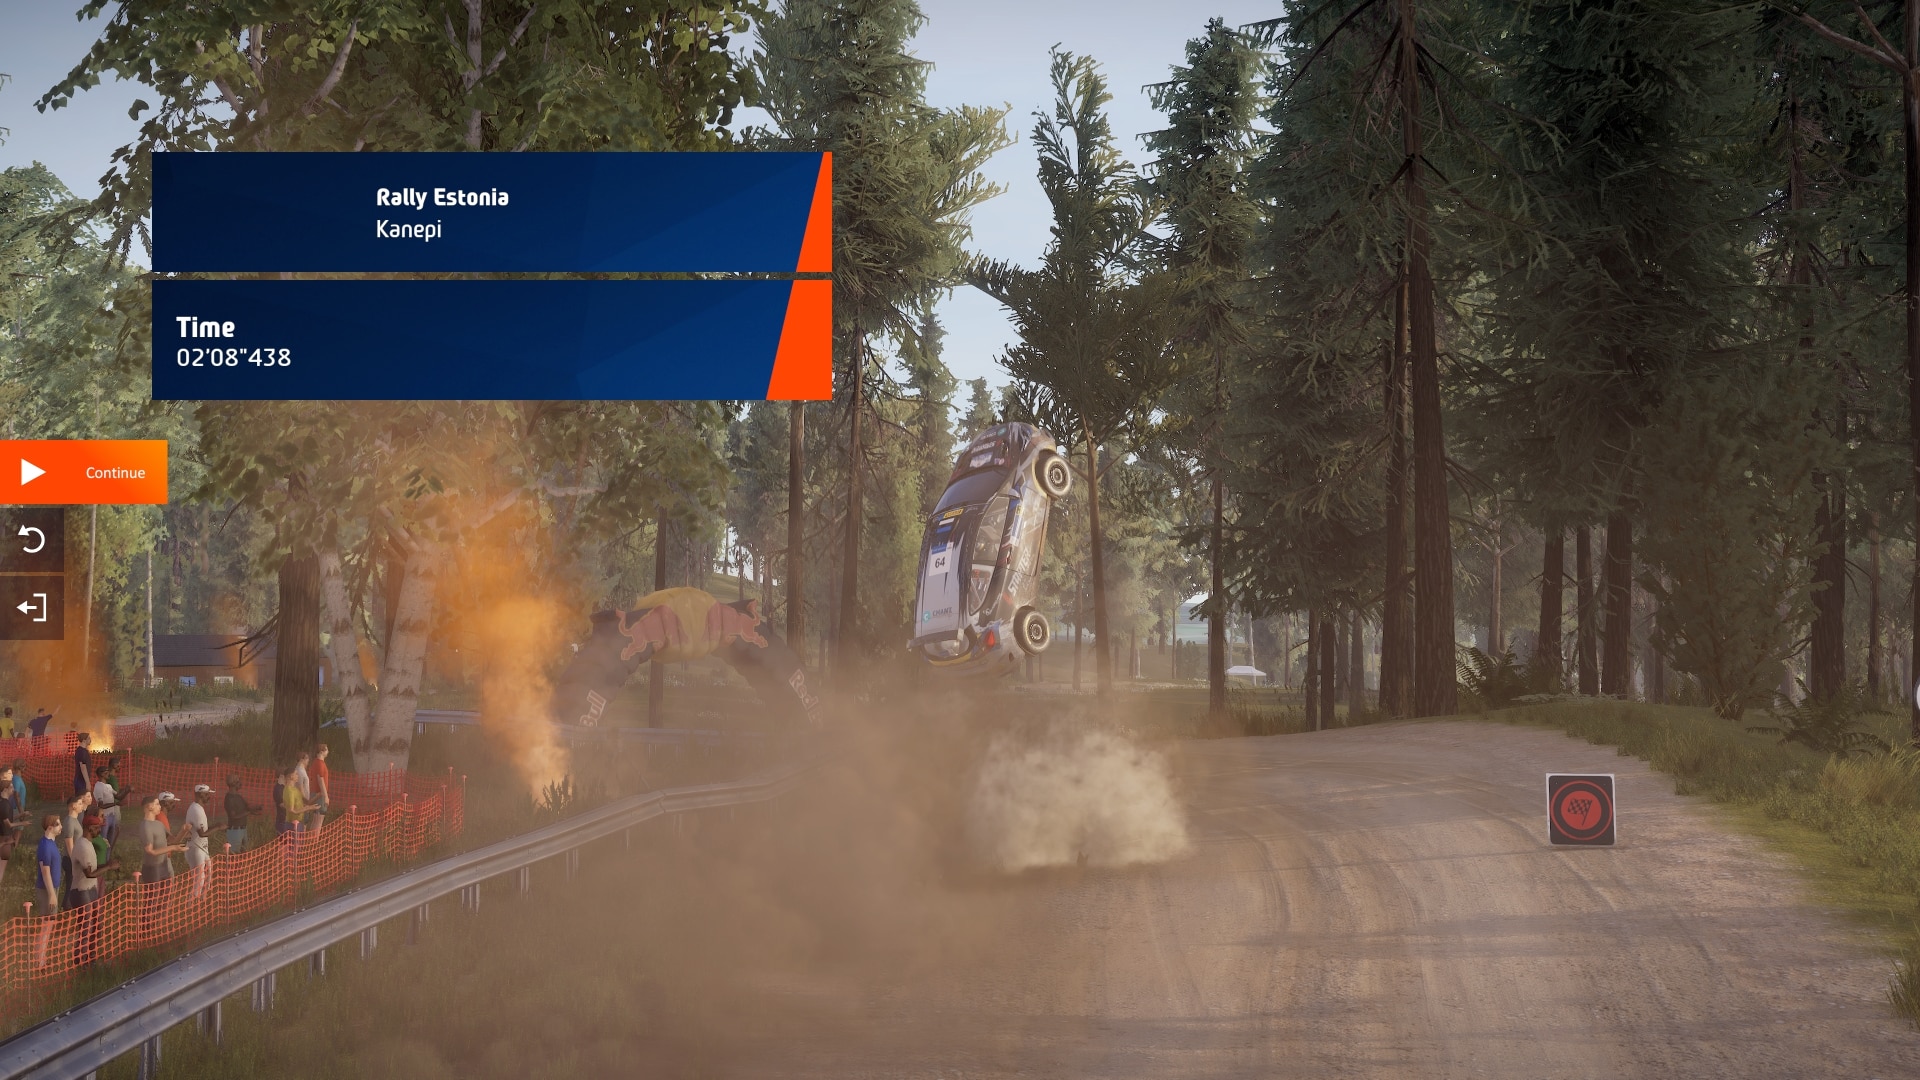 WRC Generations PS5: Which features will be available on